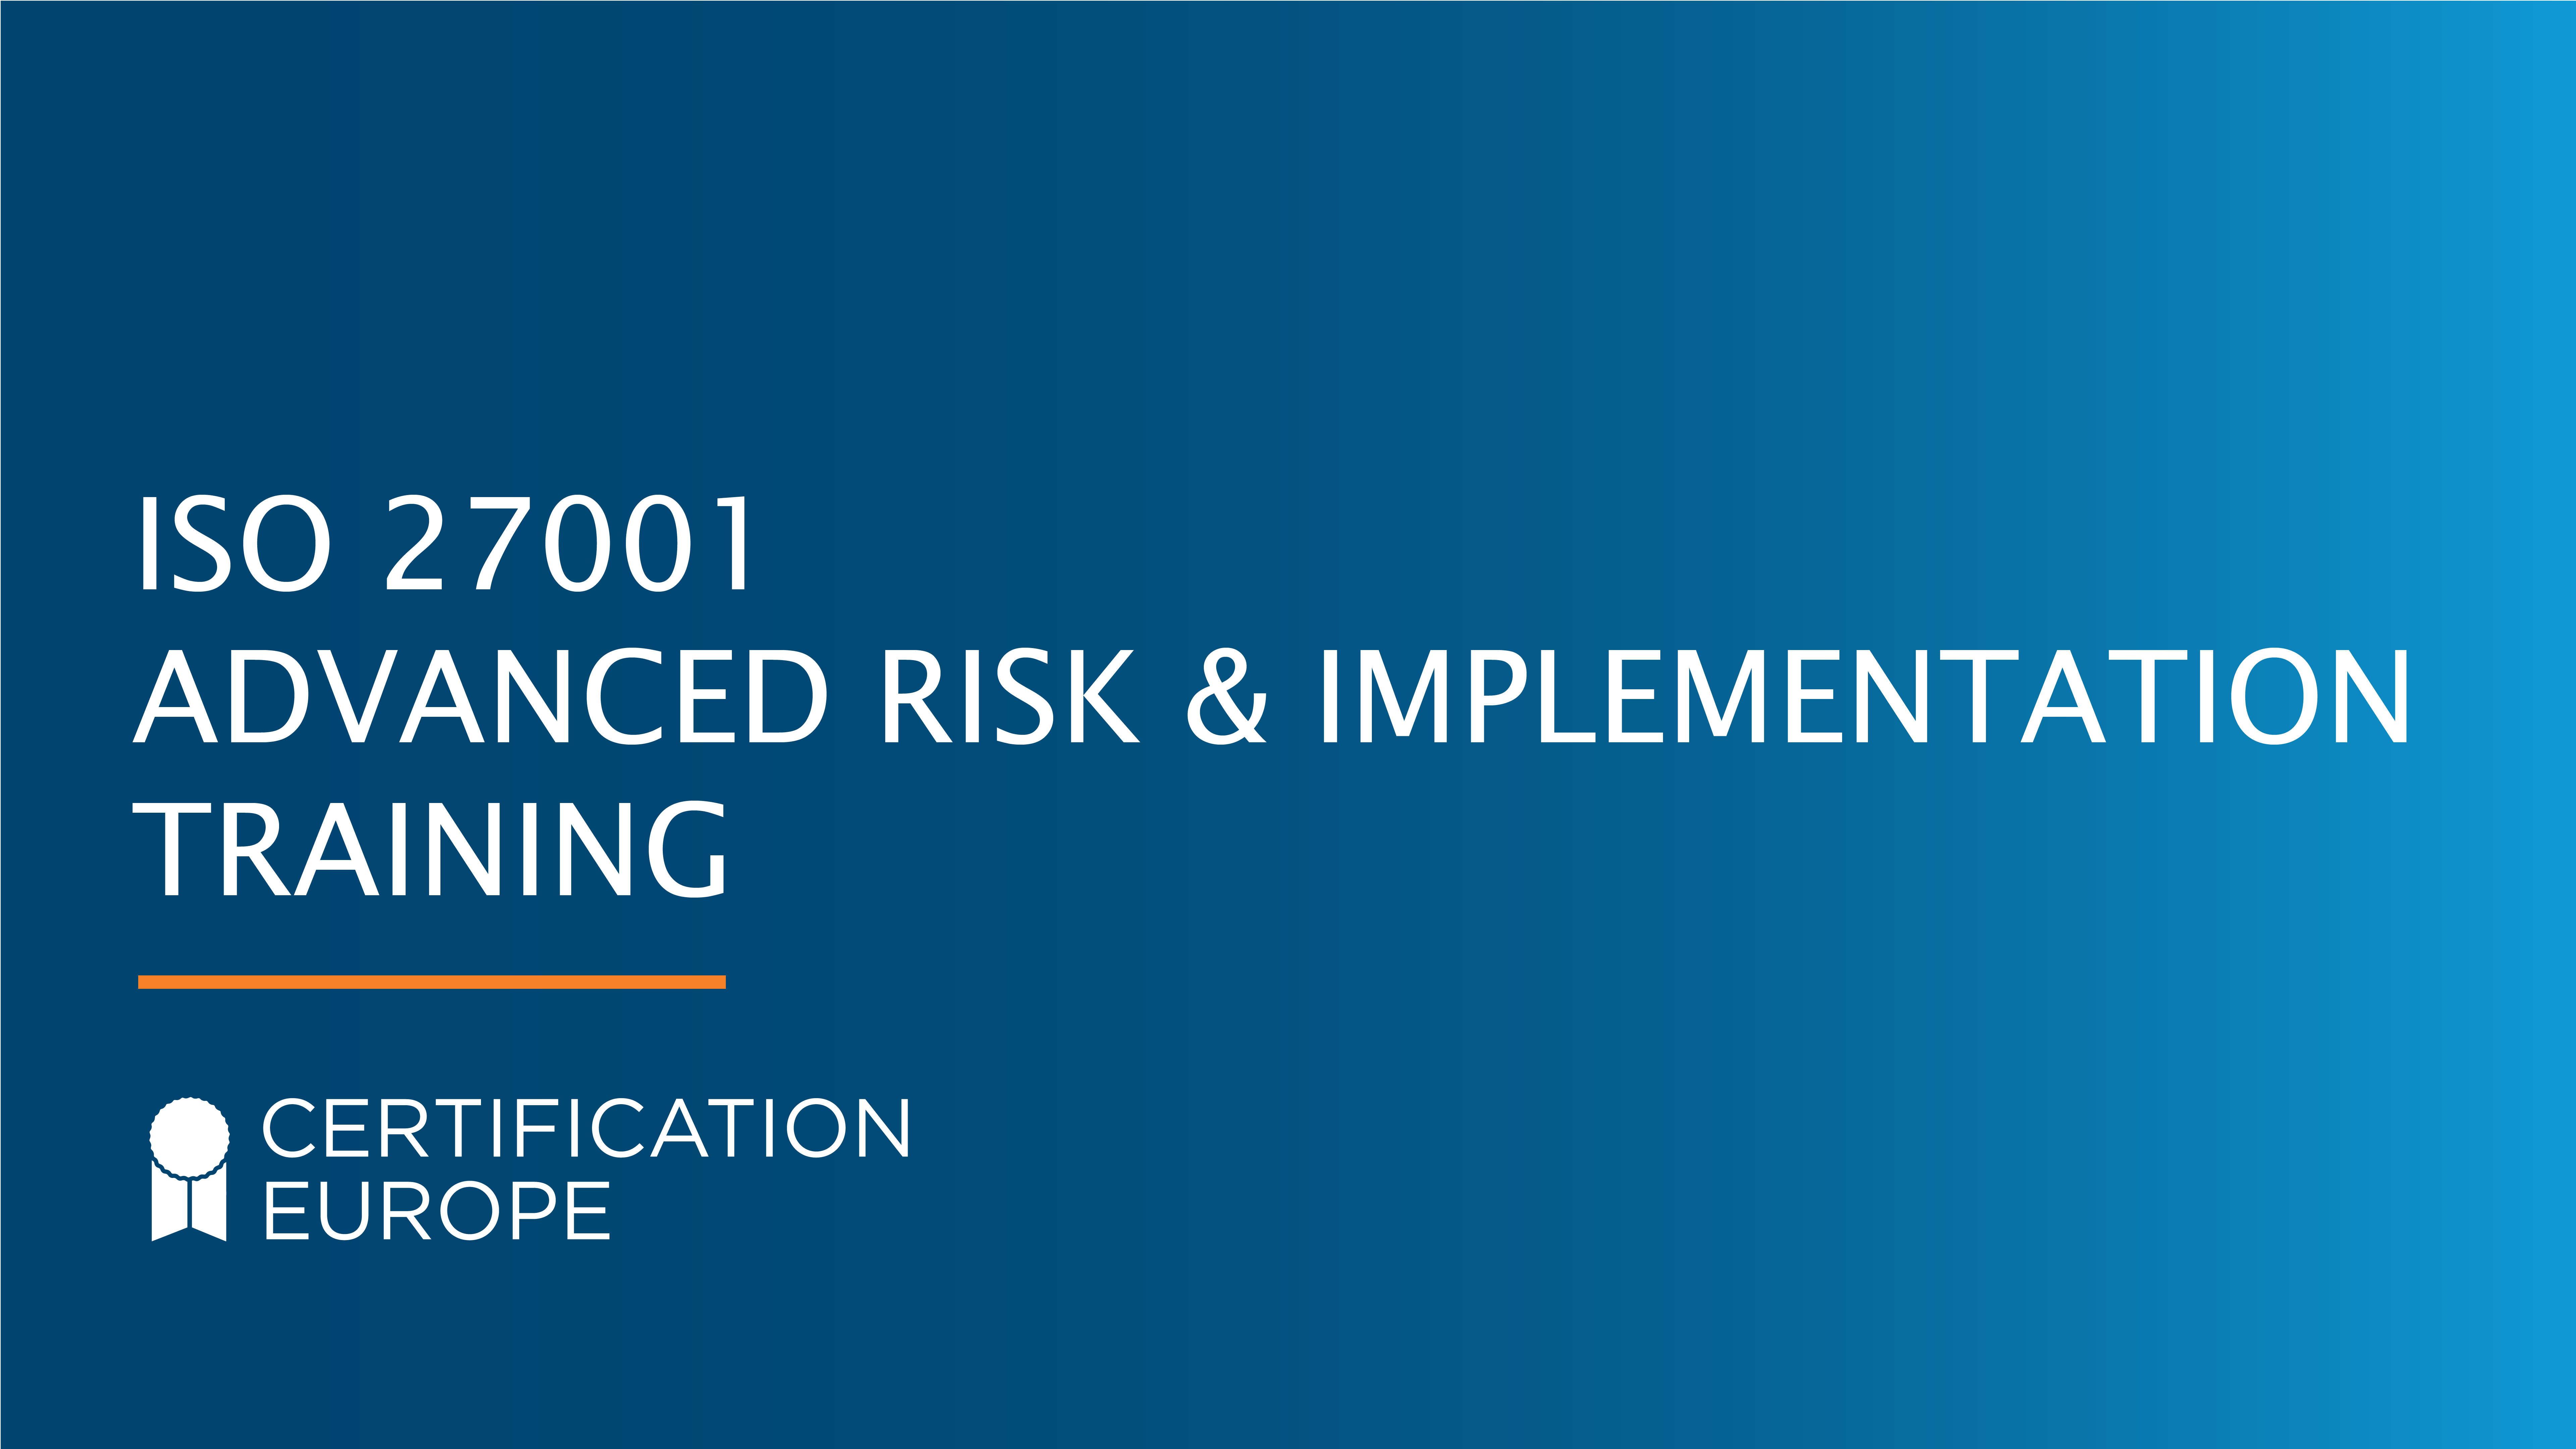 ISO 27001 Advanced Risk & Implementation Training Course